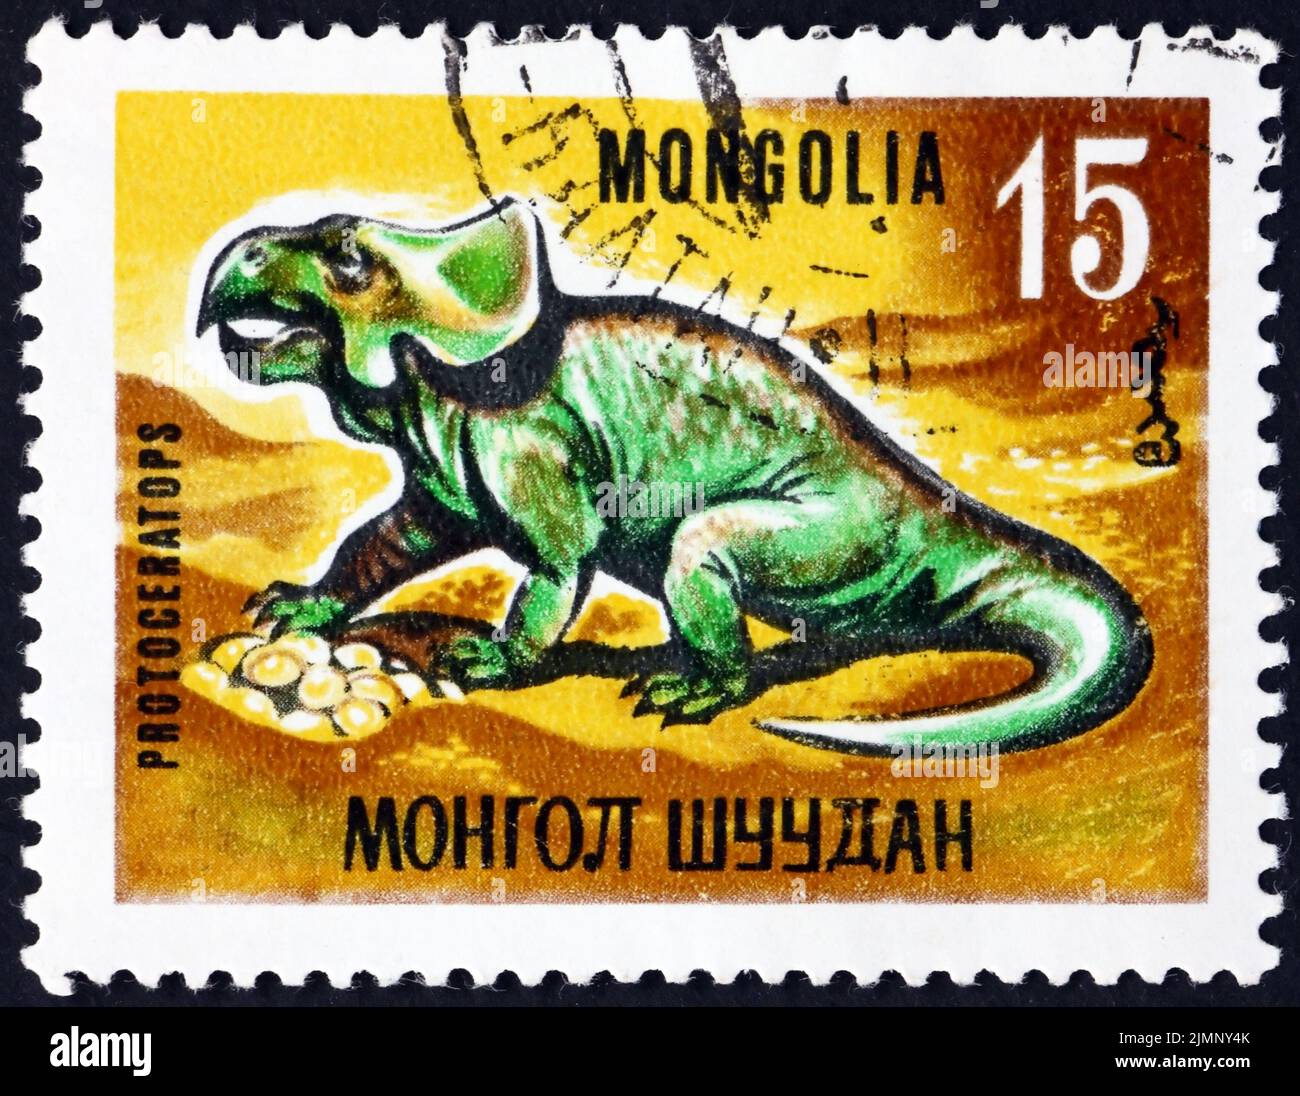 MONGOLIA - CIRCA 1967: a stamp printed in Mongolia shows protoceratops, is a genus of small dinosaurs that lived in Asia during the Late Cretaceous, a Stock Photo